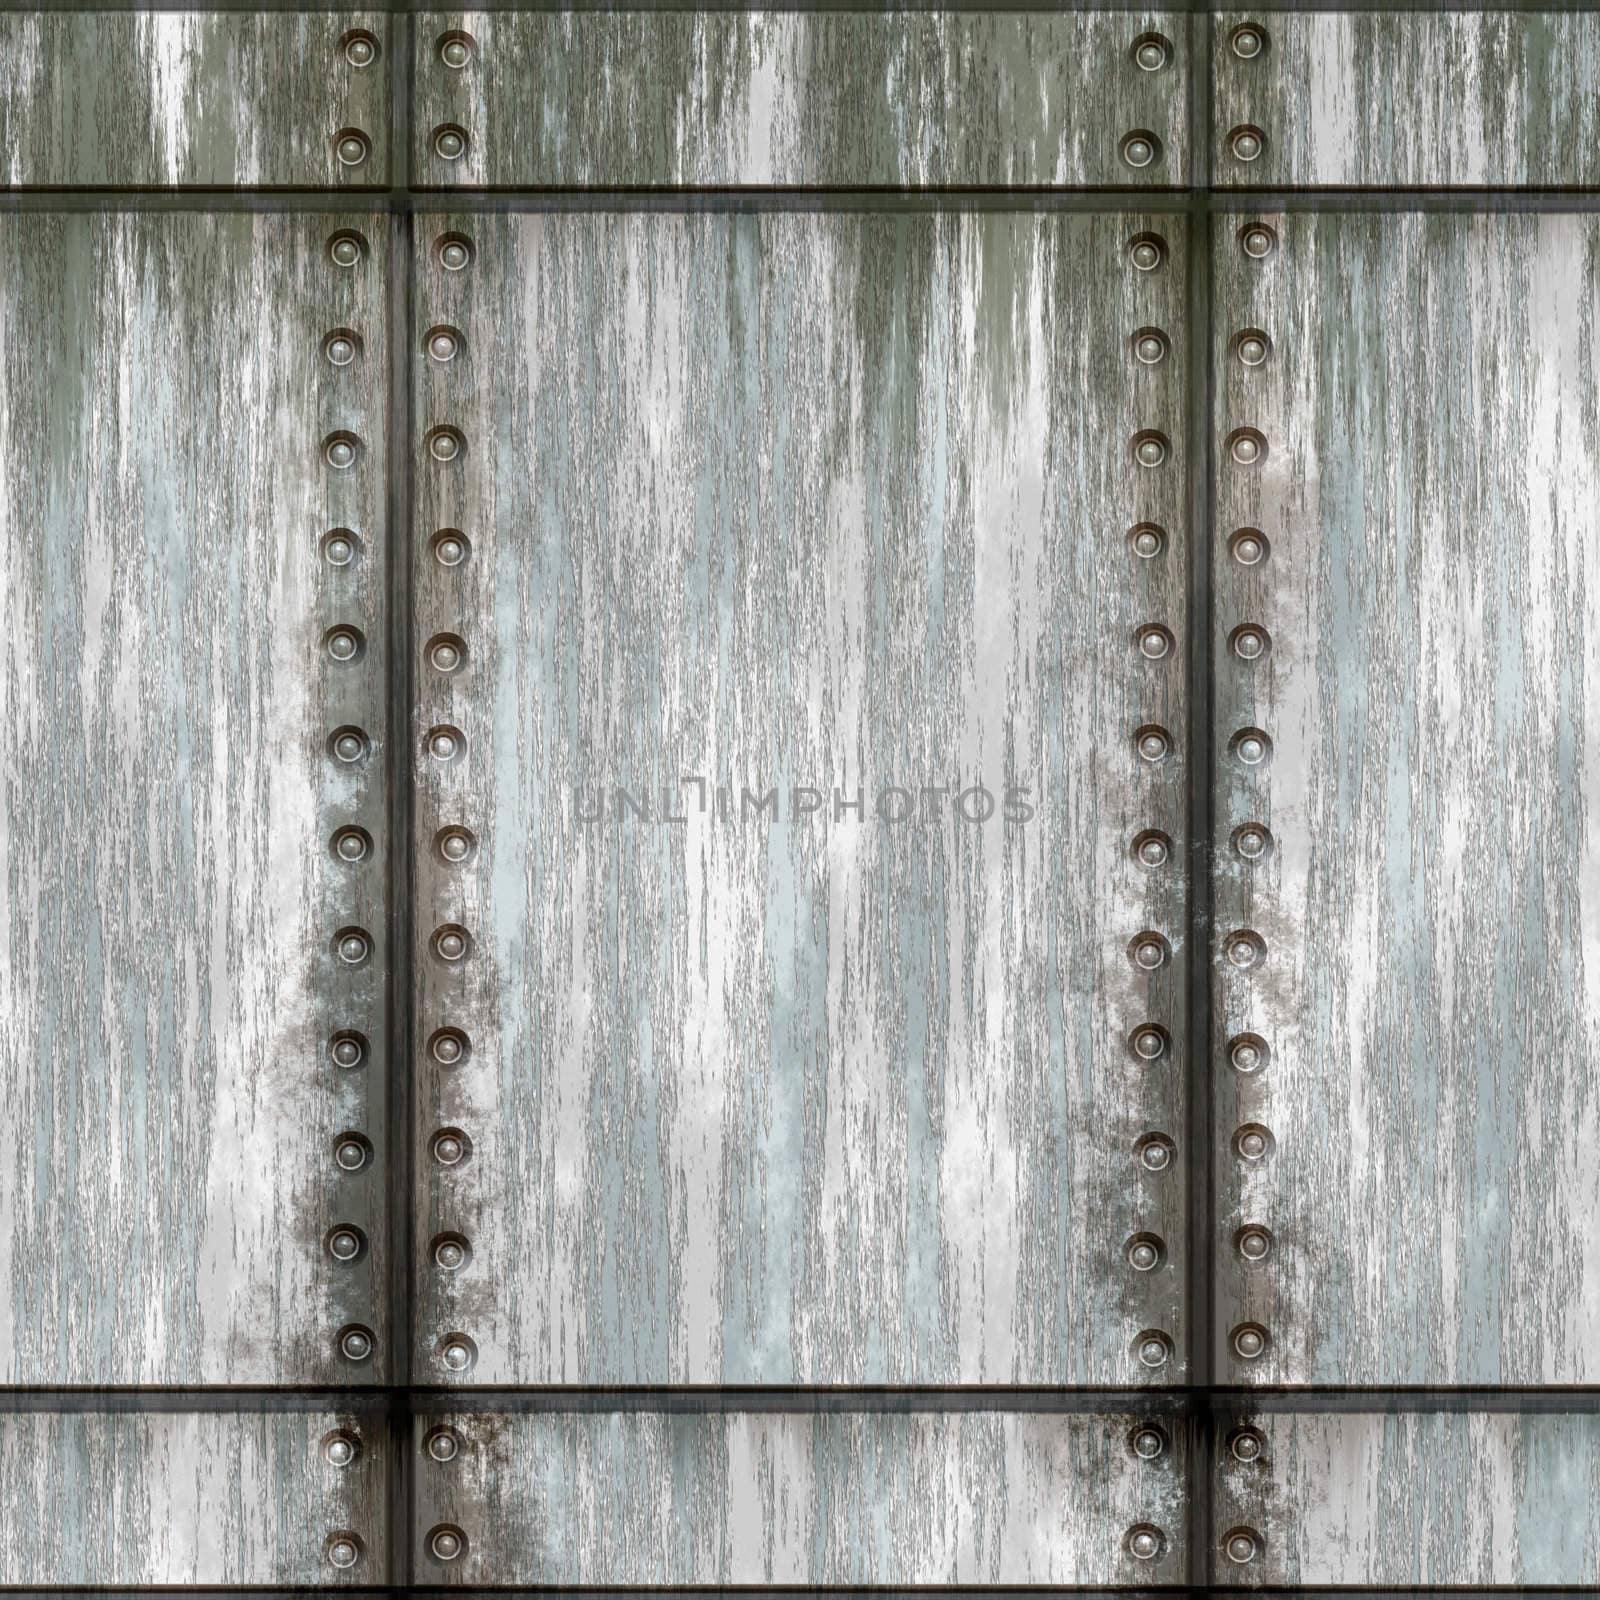 Seamless worn green metal texture with rivets that tiles as a pattern in any direction.